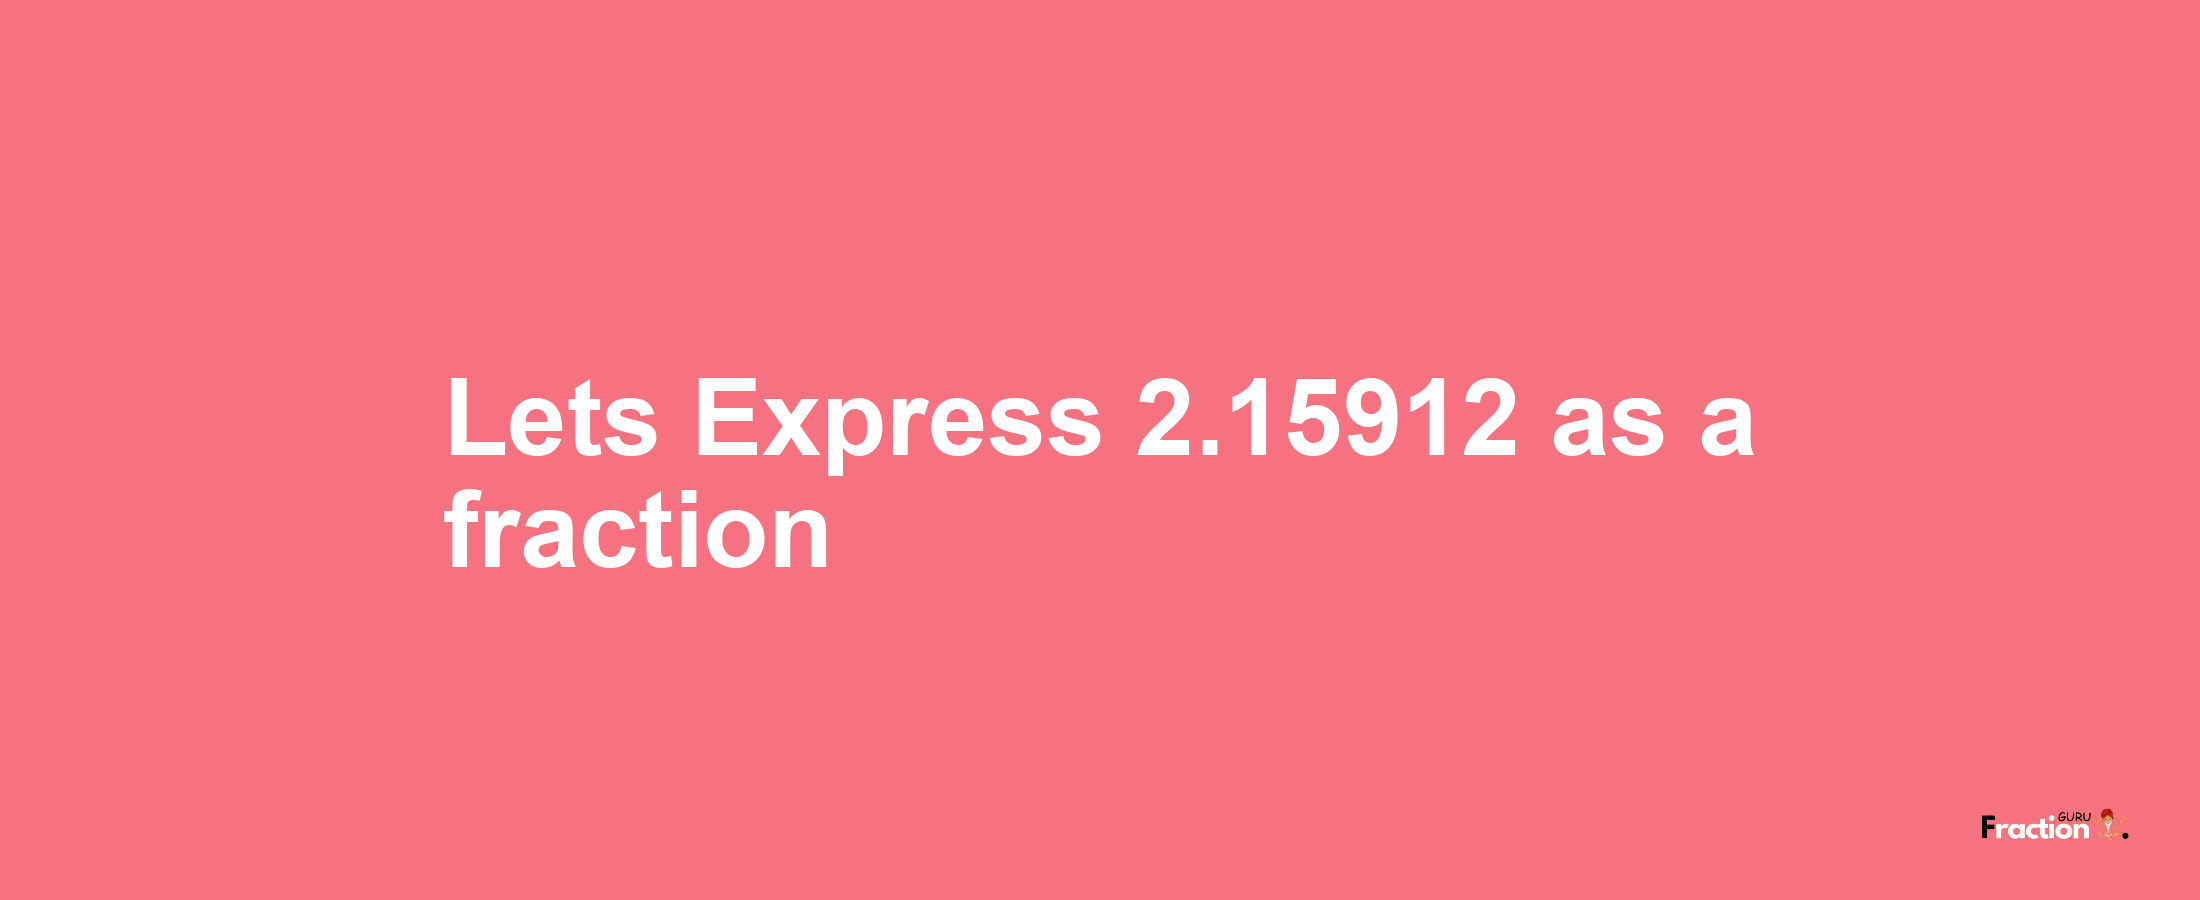 Lets Express 2.15912 as afraction